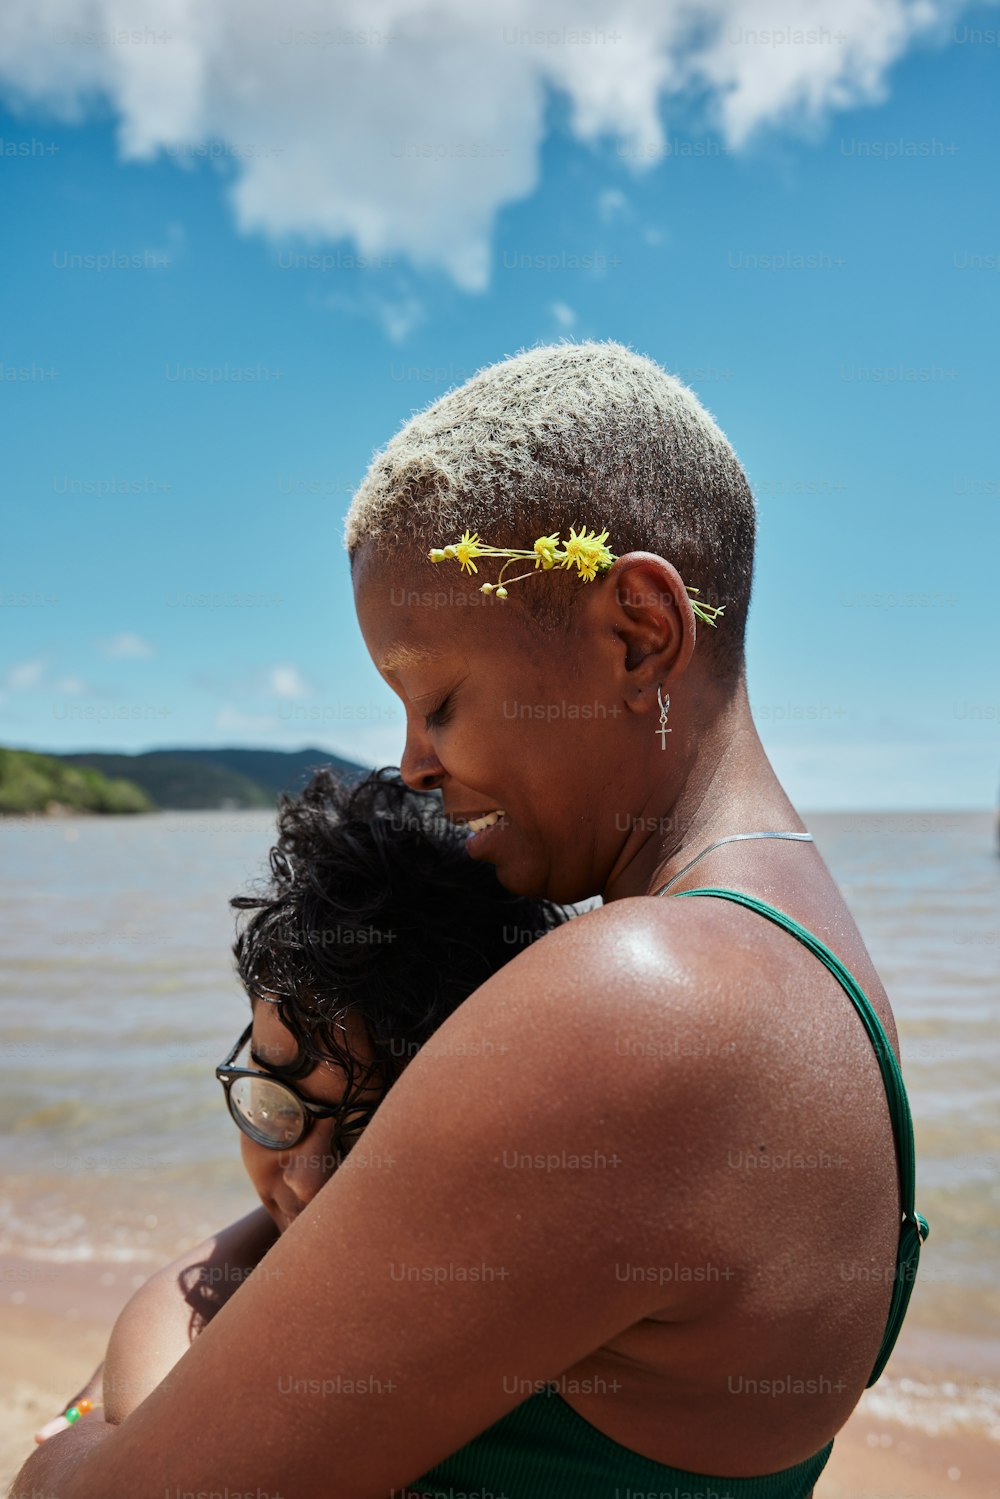 a woman holding a child on the beach